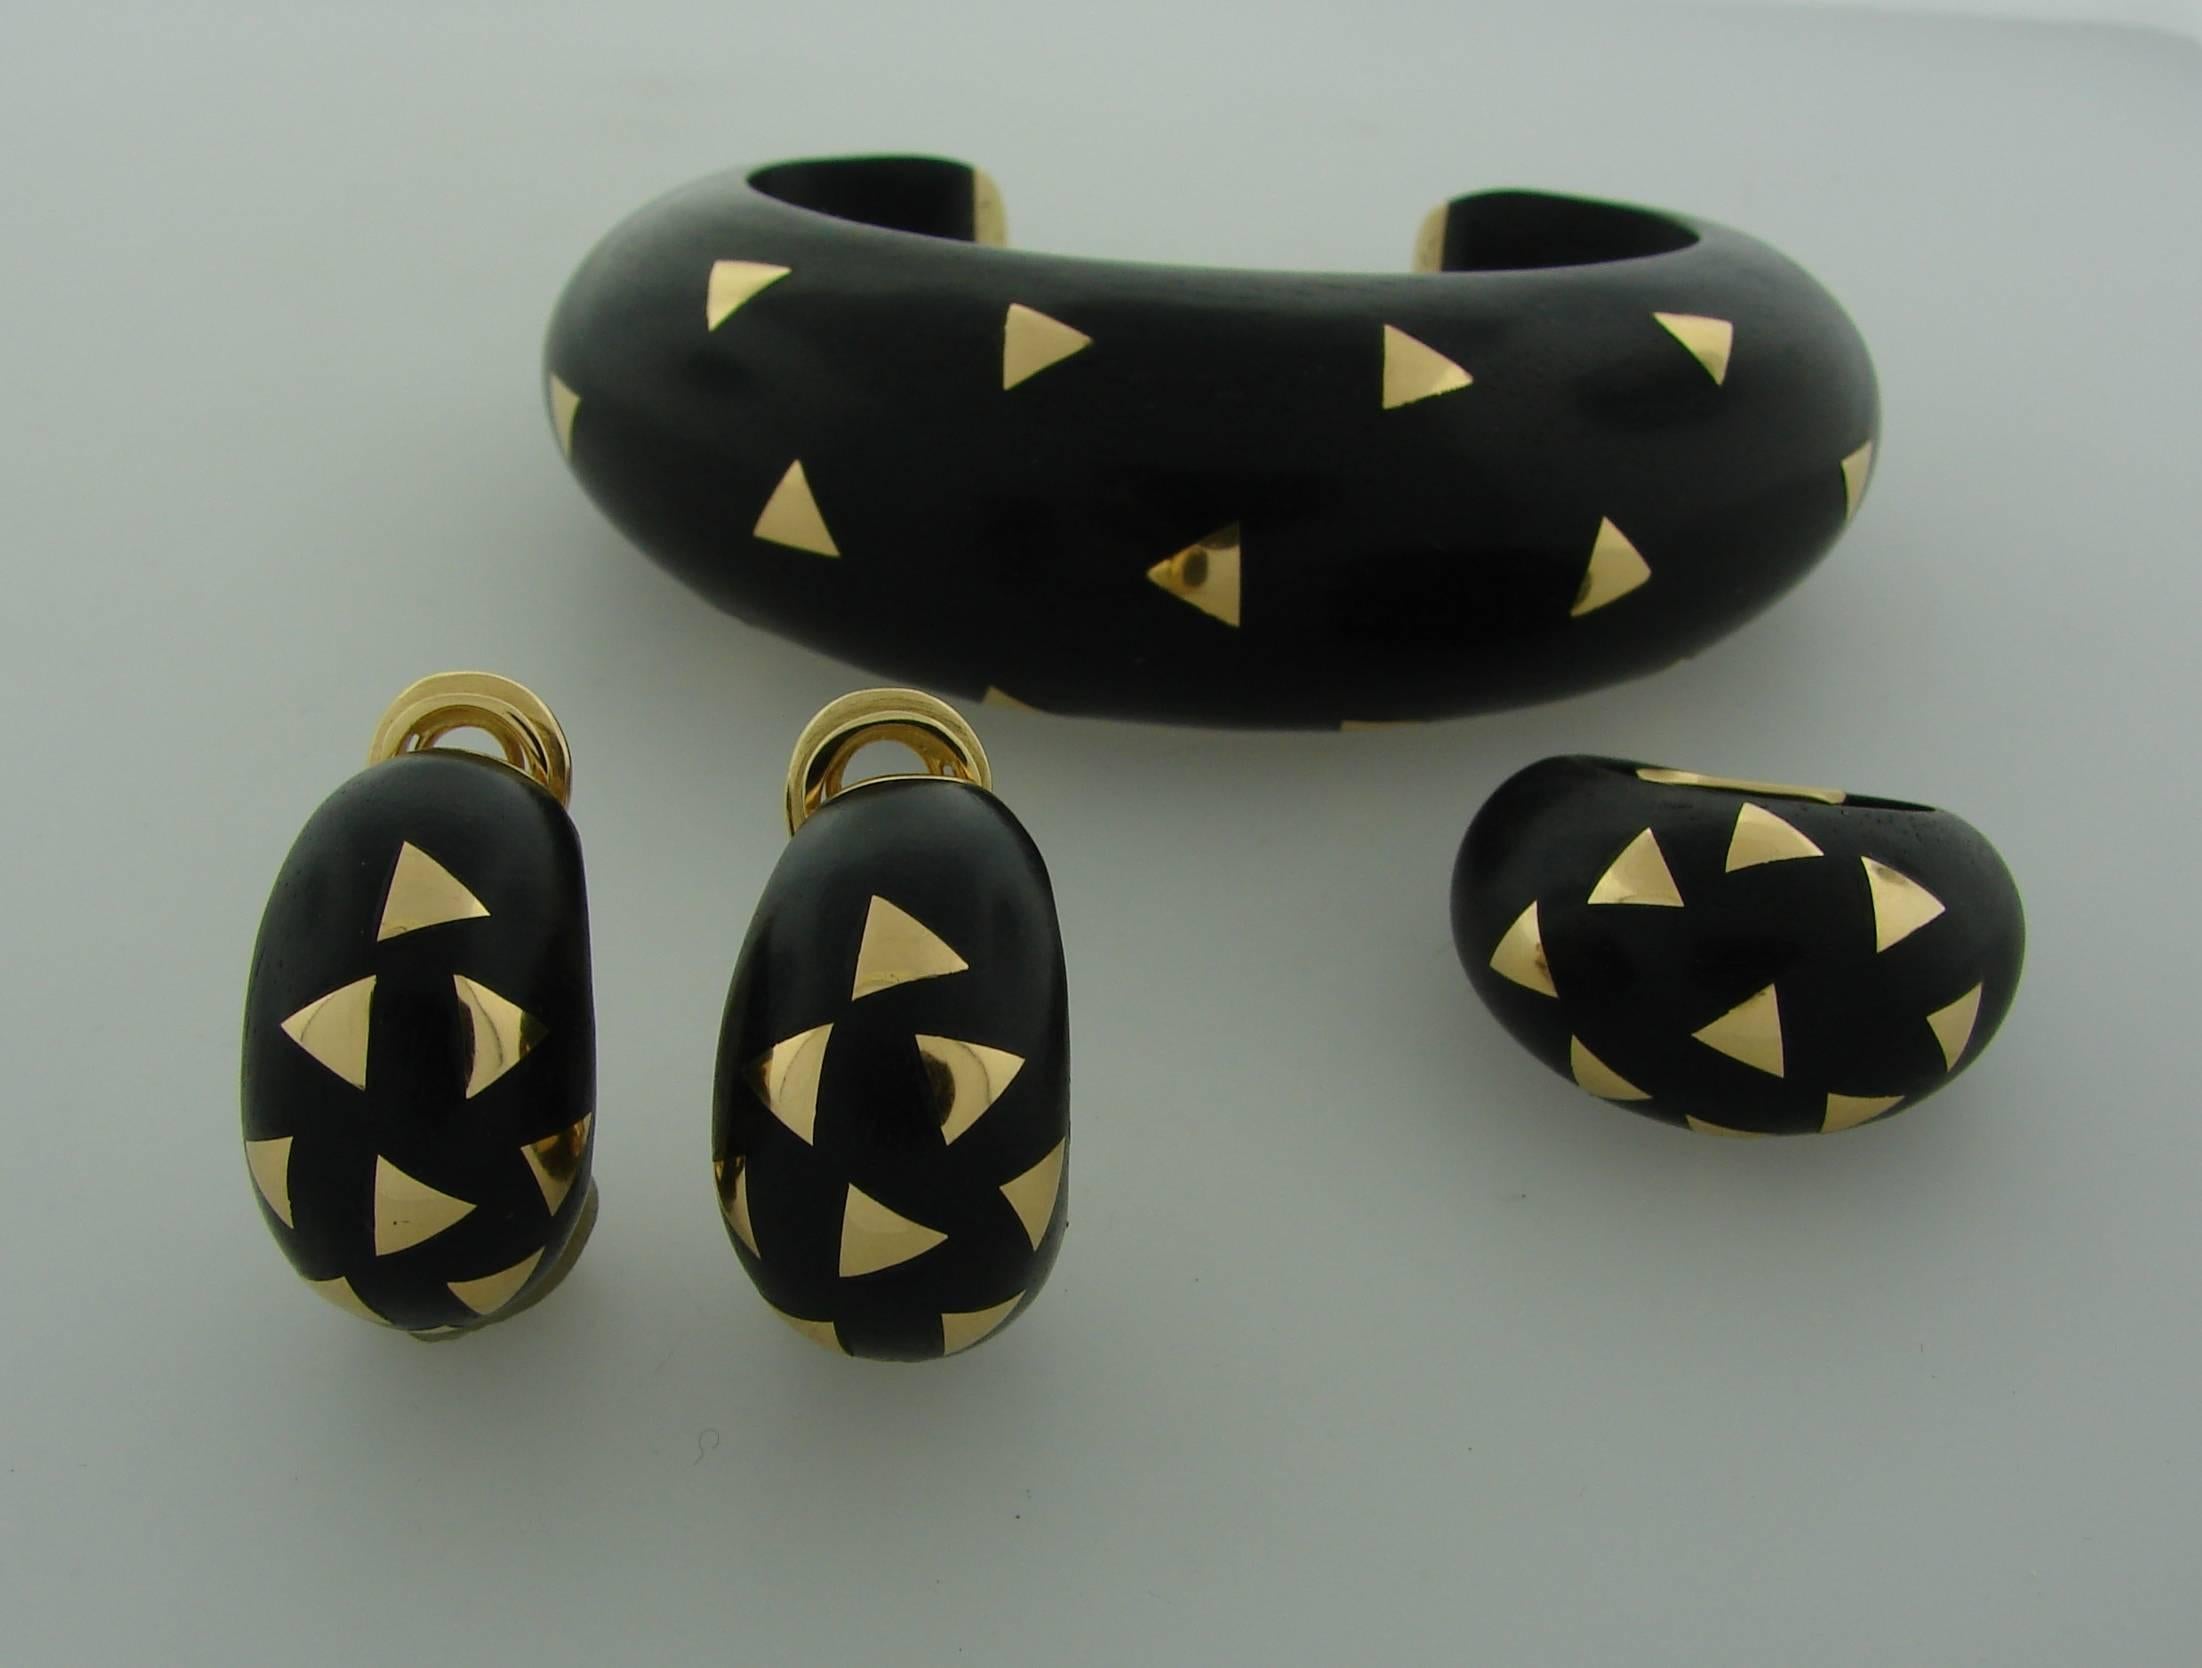 Chic and stylish set created by Van Cleef & Arpels in France in the 1970's. It consists of a bangle, a ring and a pair of earrings and is made of ebony wood and 18 karat (stamped) yellow gold. It will be a great addition to your collection. Elegant